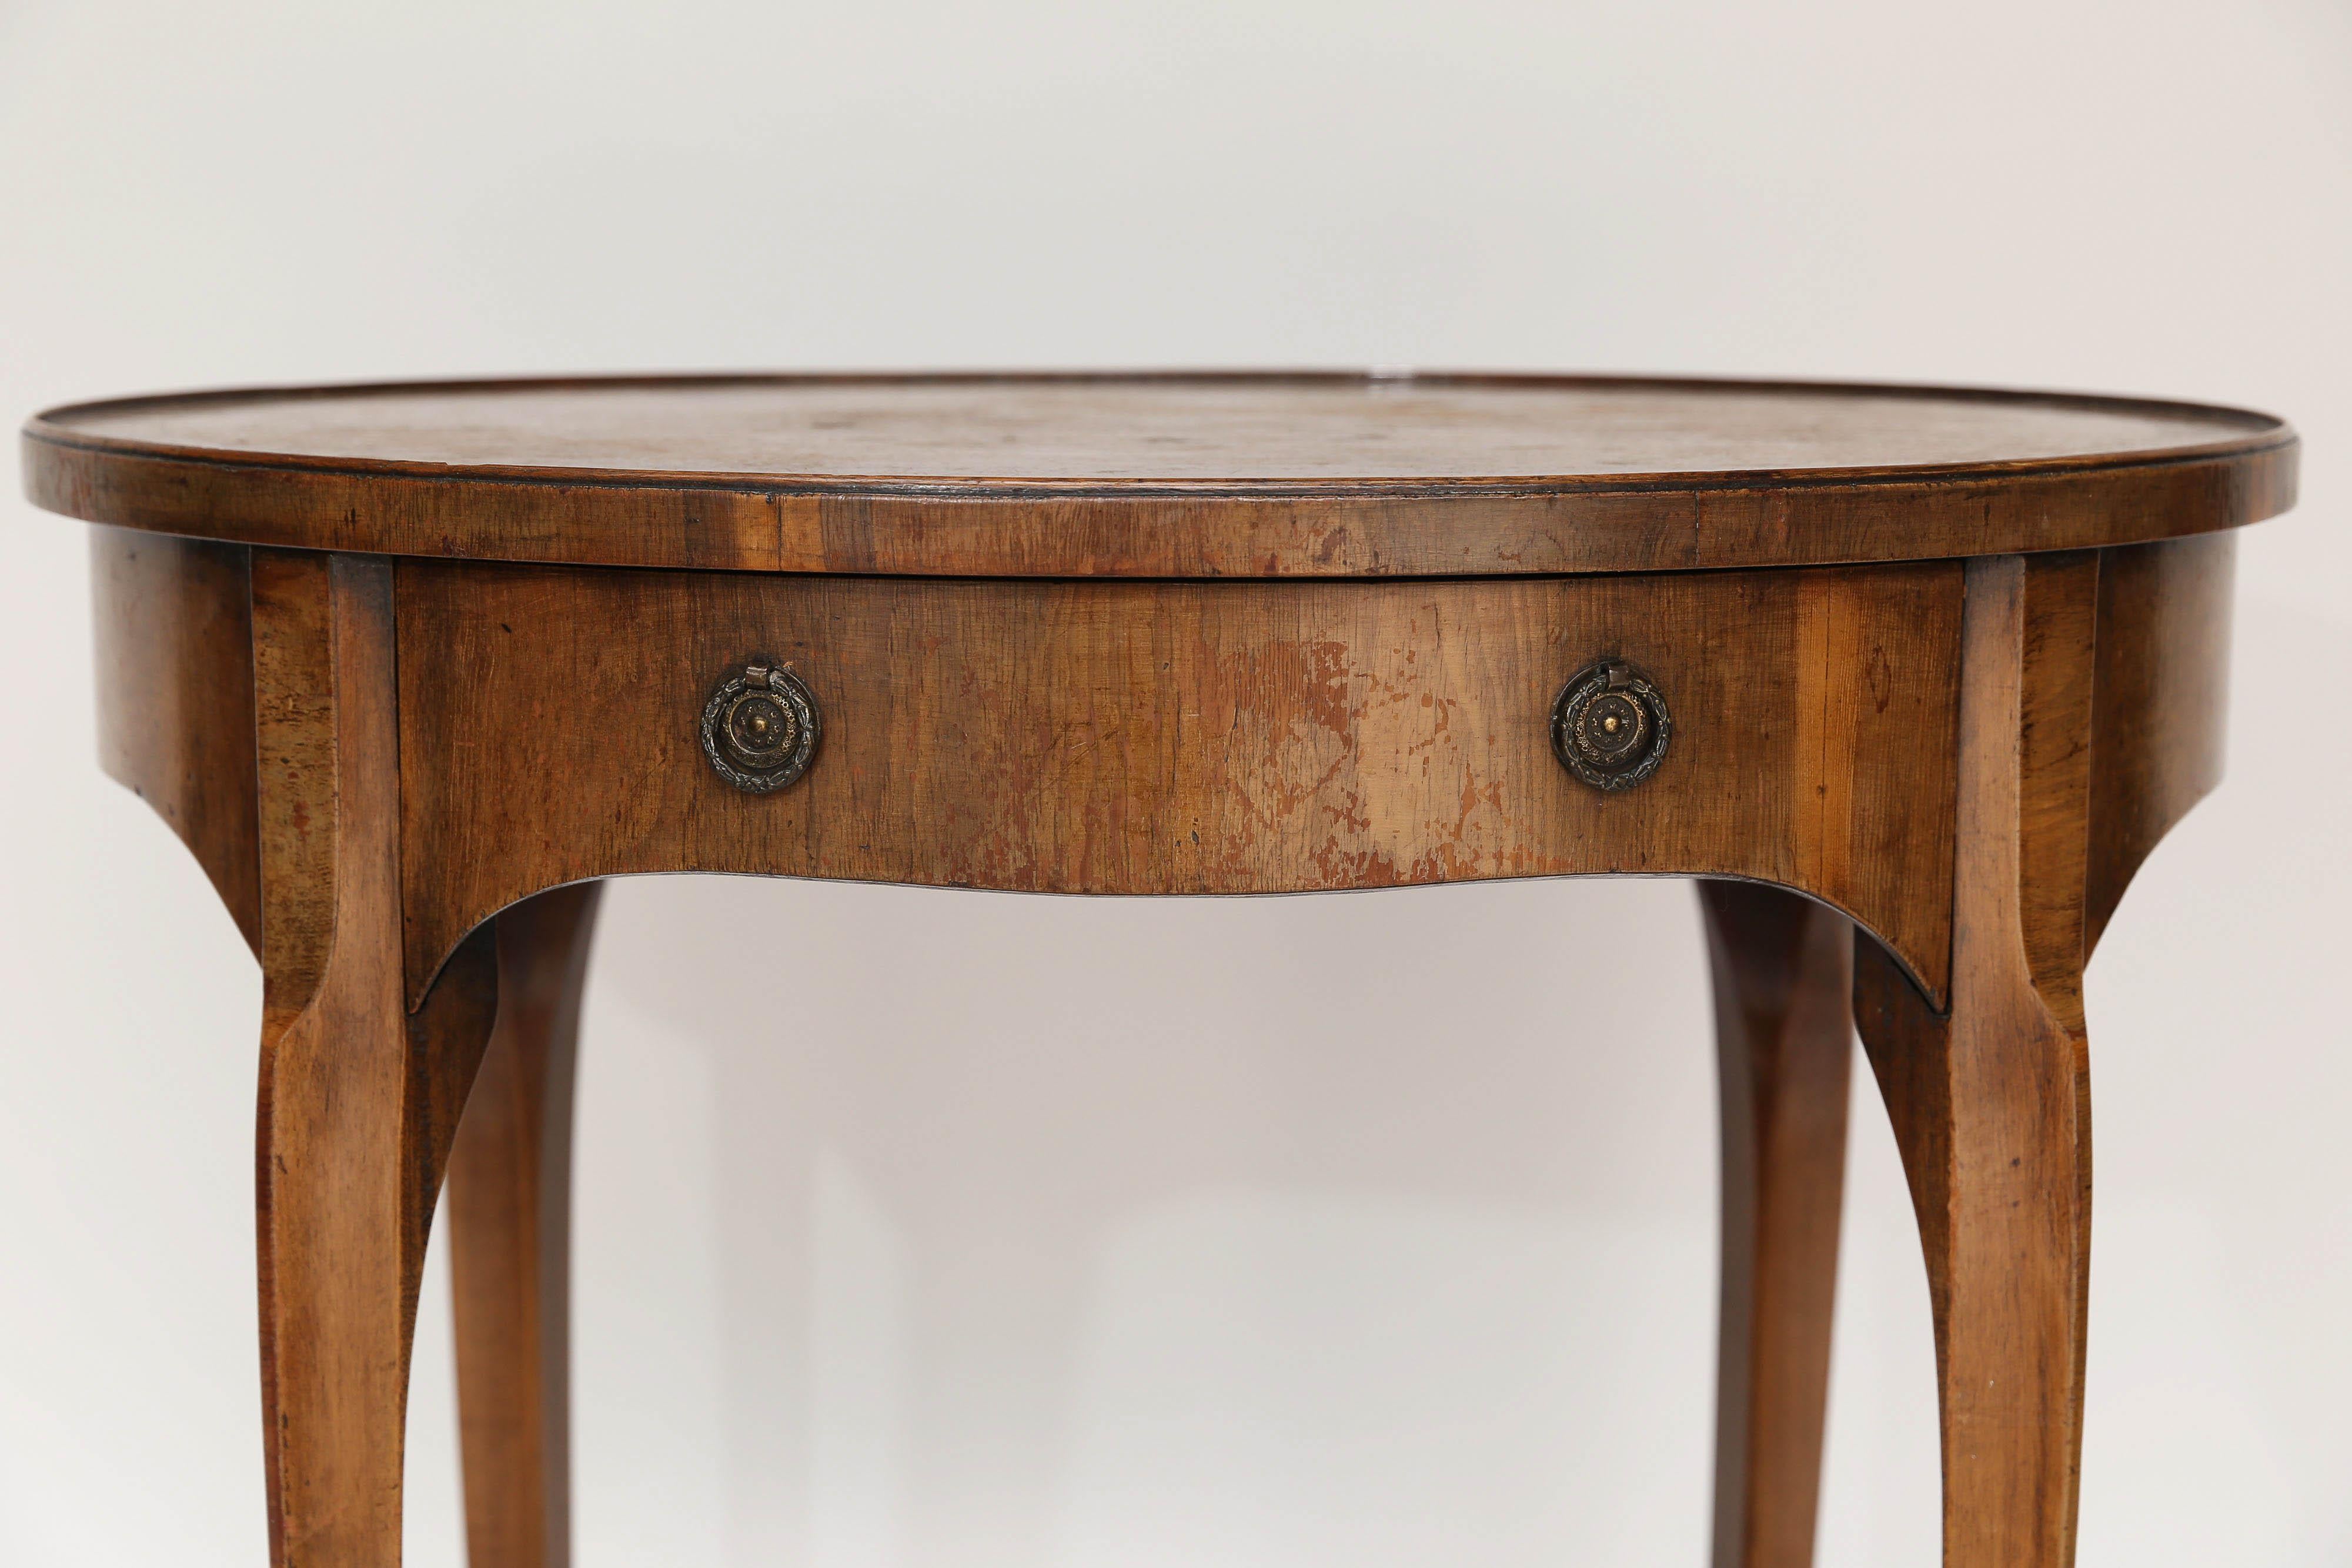 Found in England, this side table is sure to delight. Featuring one drawer, a lower shelf and beautiful classic lines, this table could be used as a side table, tea table, end table or drinks table.